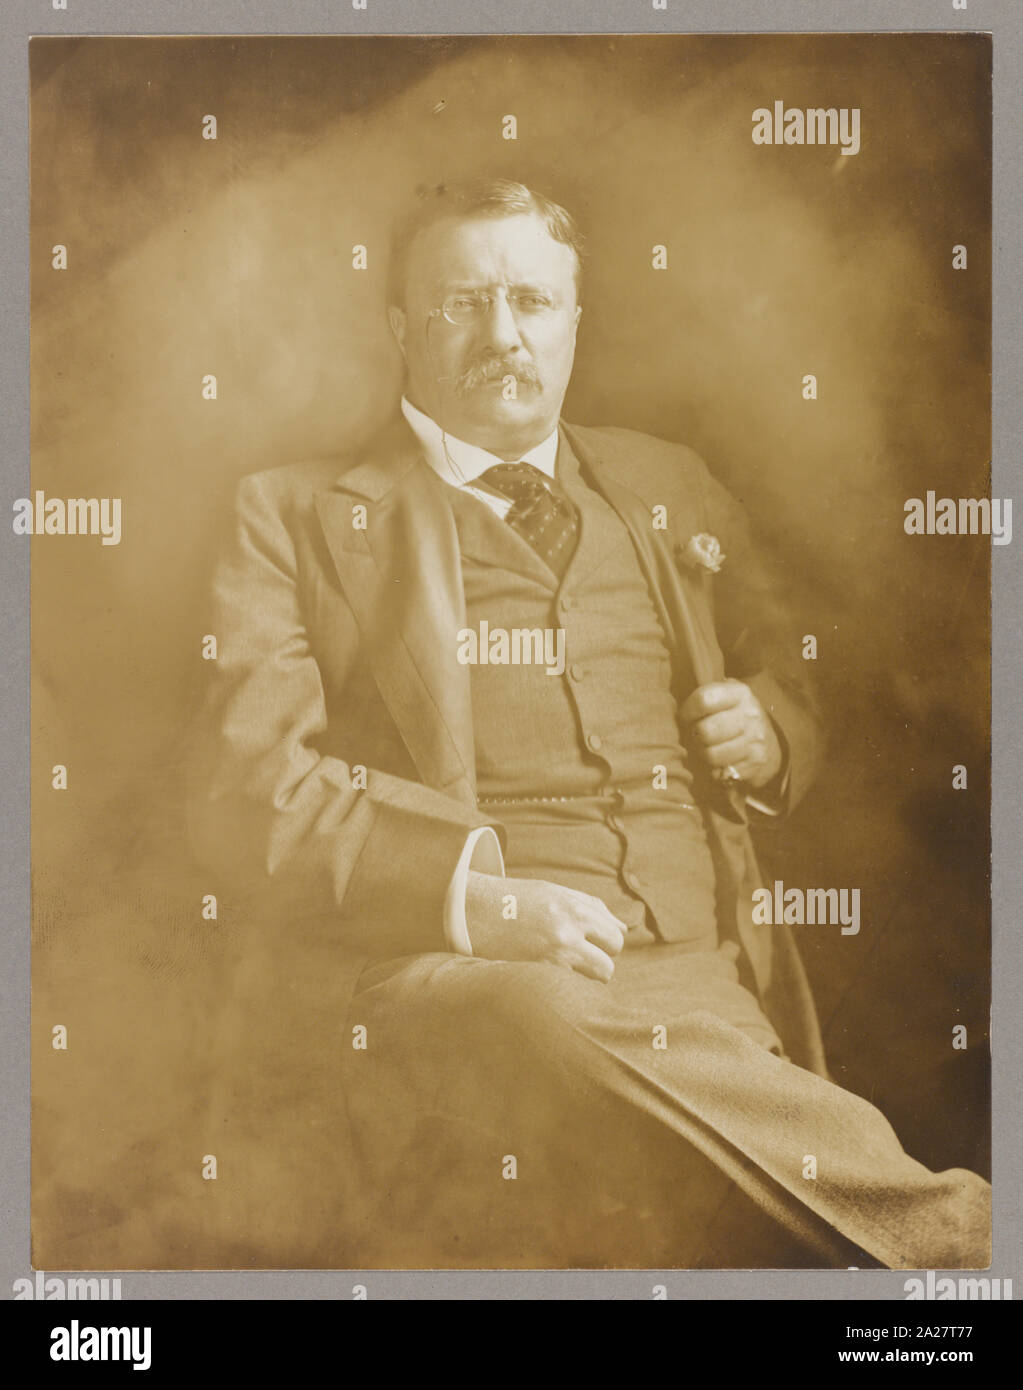 PresidentTheodore Roosevelt, three-quarter length portrait, seated, facing front, hand gripping jacket lapel Stock Photo